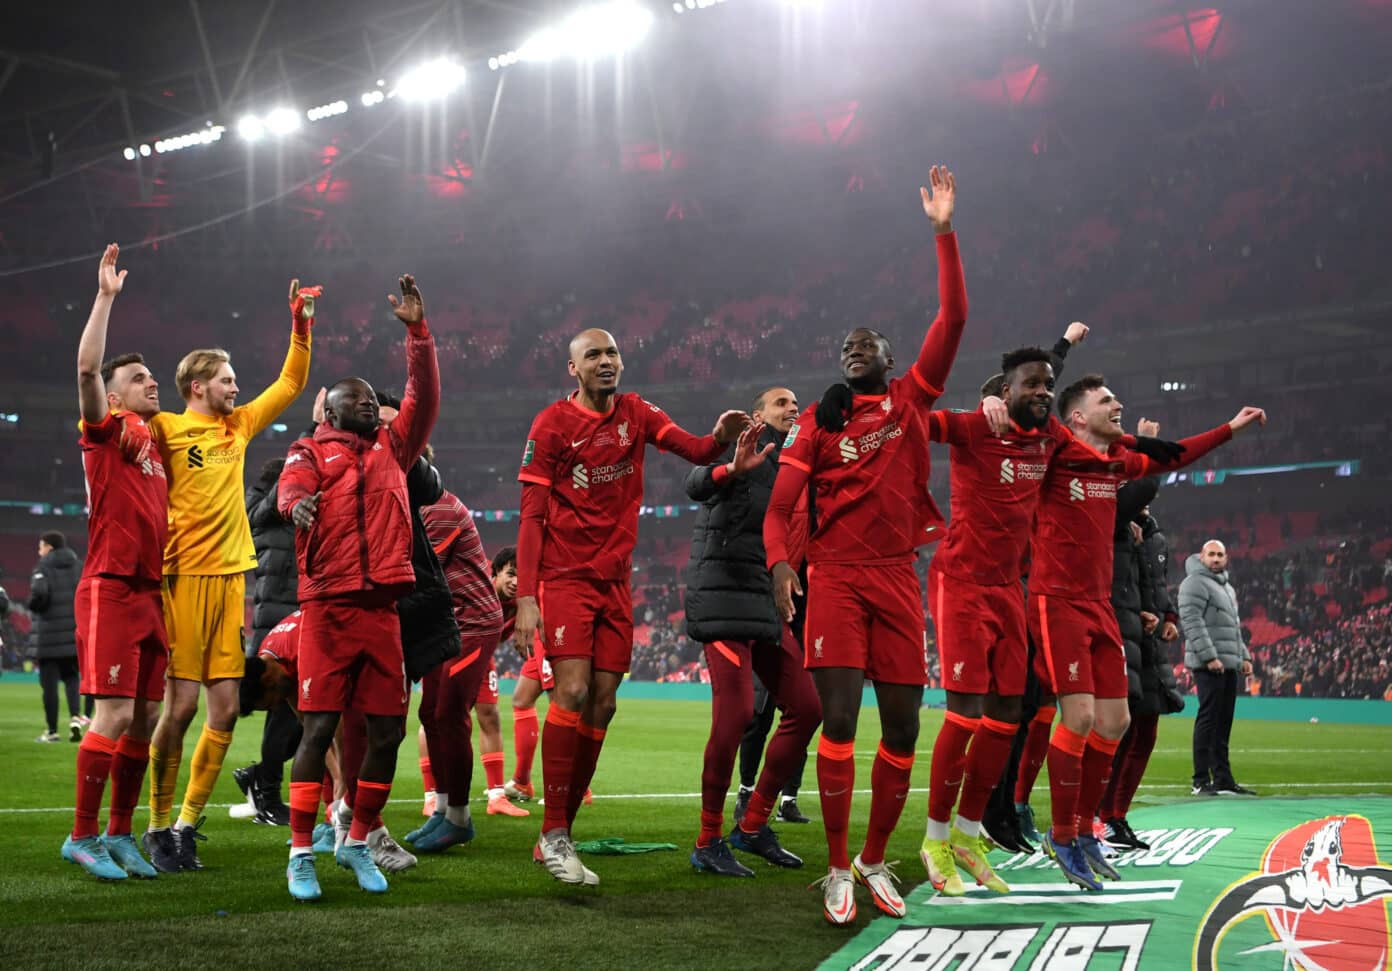 Phobia motor hjemmelevering Chelsea 0-0 Liverpool (10-11 pens) - Watch the Carabao Cup final highlights  (Video) - LFC Globe